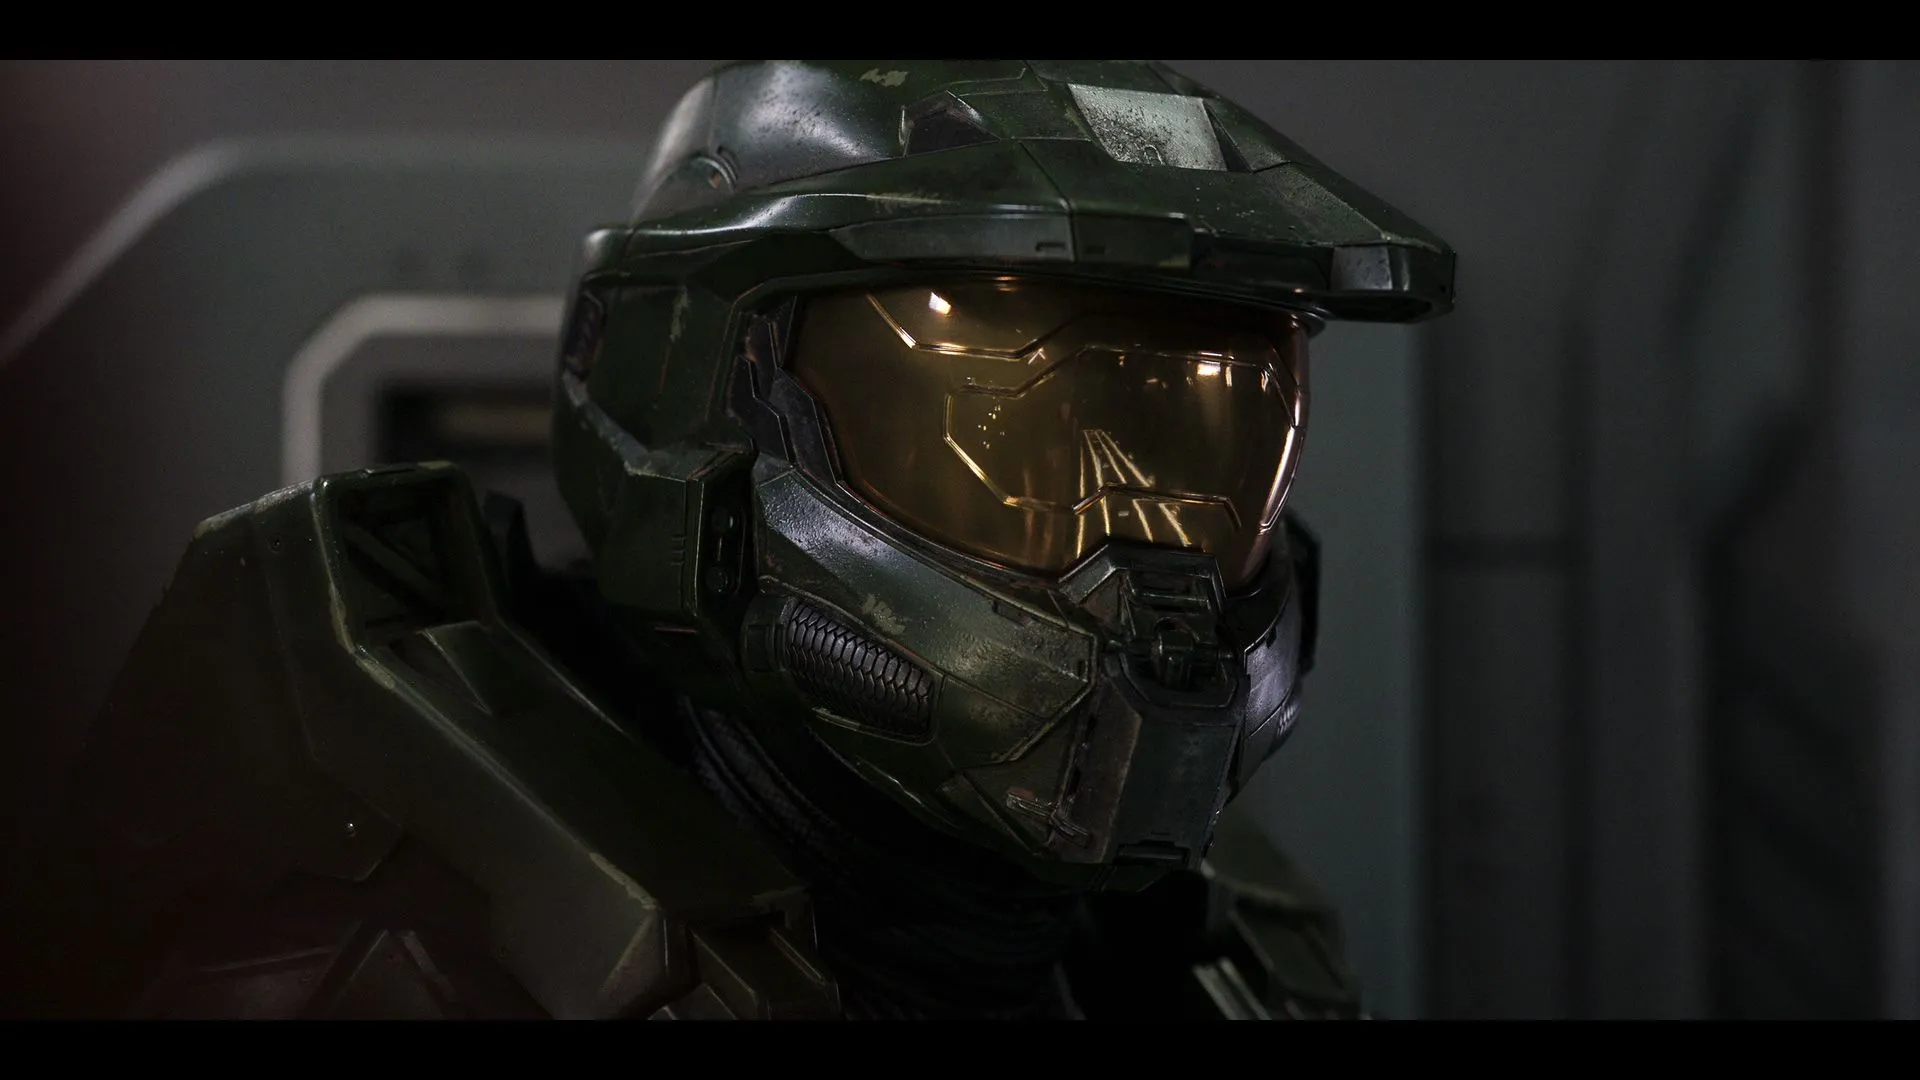 Halo Season 2: Release, Cast and Everything We Know So Far